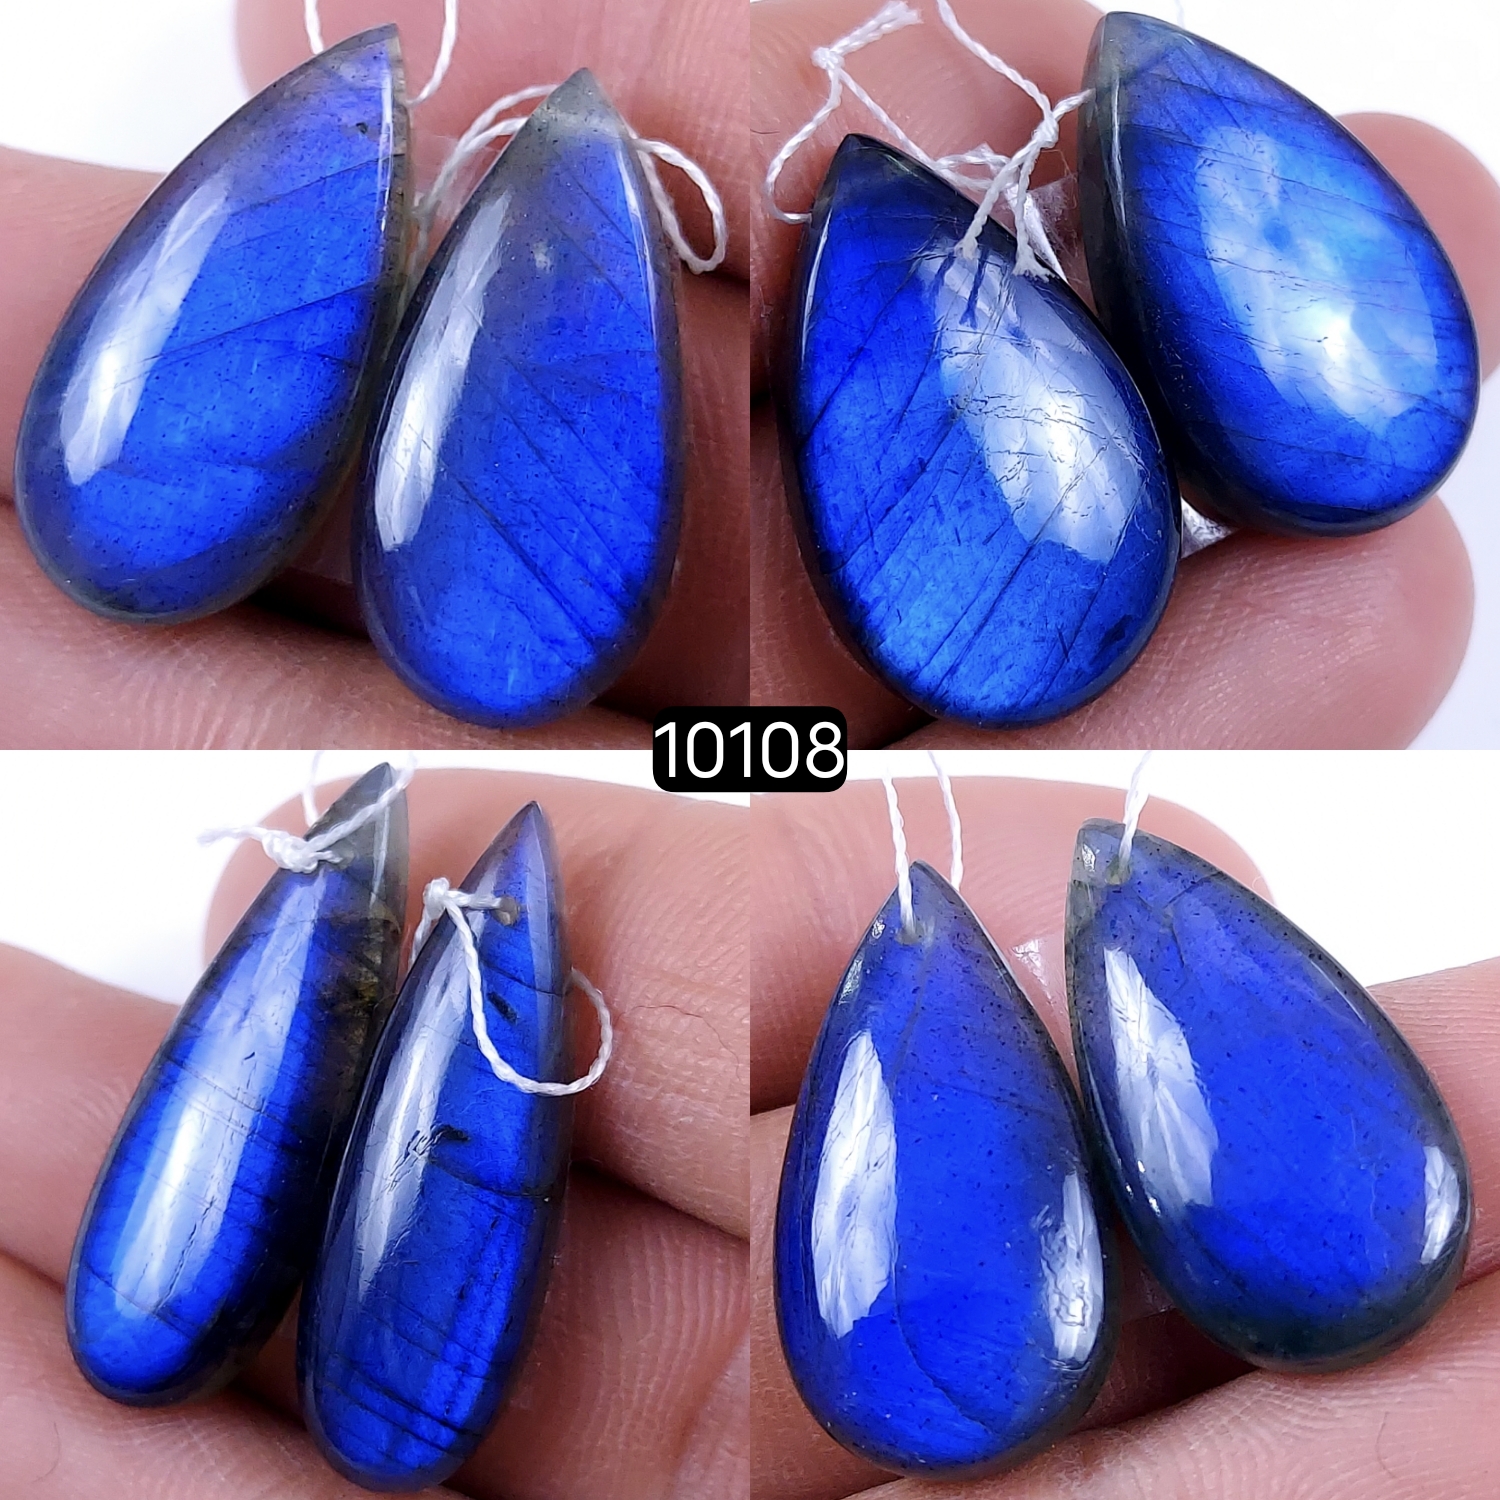 4Pair 130Cts Natural Labradorite Blue Fire Briolette Dangle Drop Earrings Semi Precious Crystal For Hoop Earrings Blue Gemstone Cabochon Matching pair 30x10 25x12mm #10108